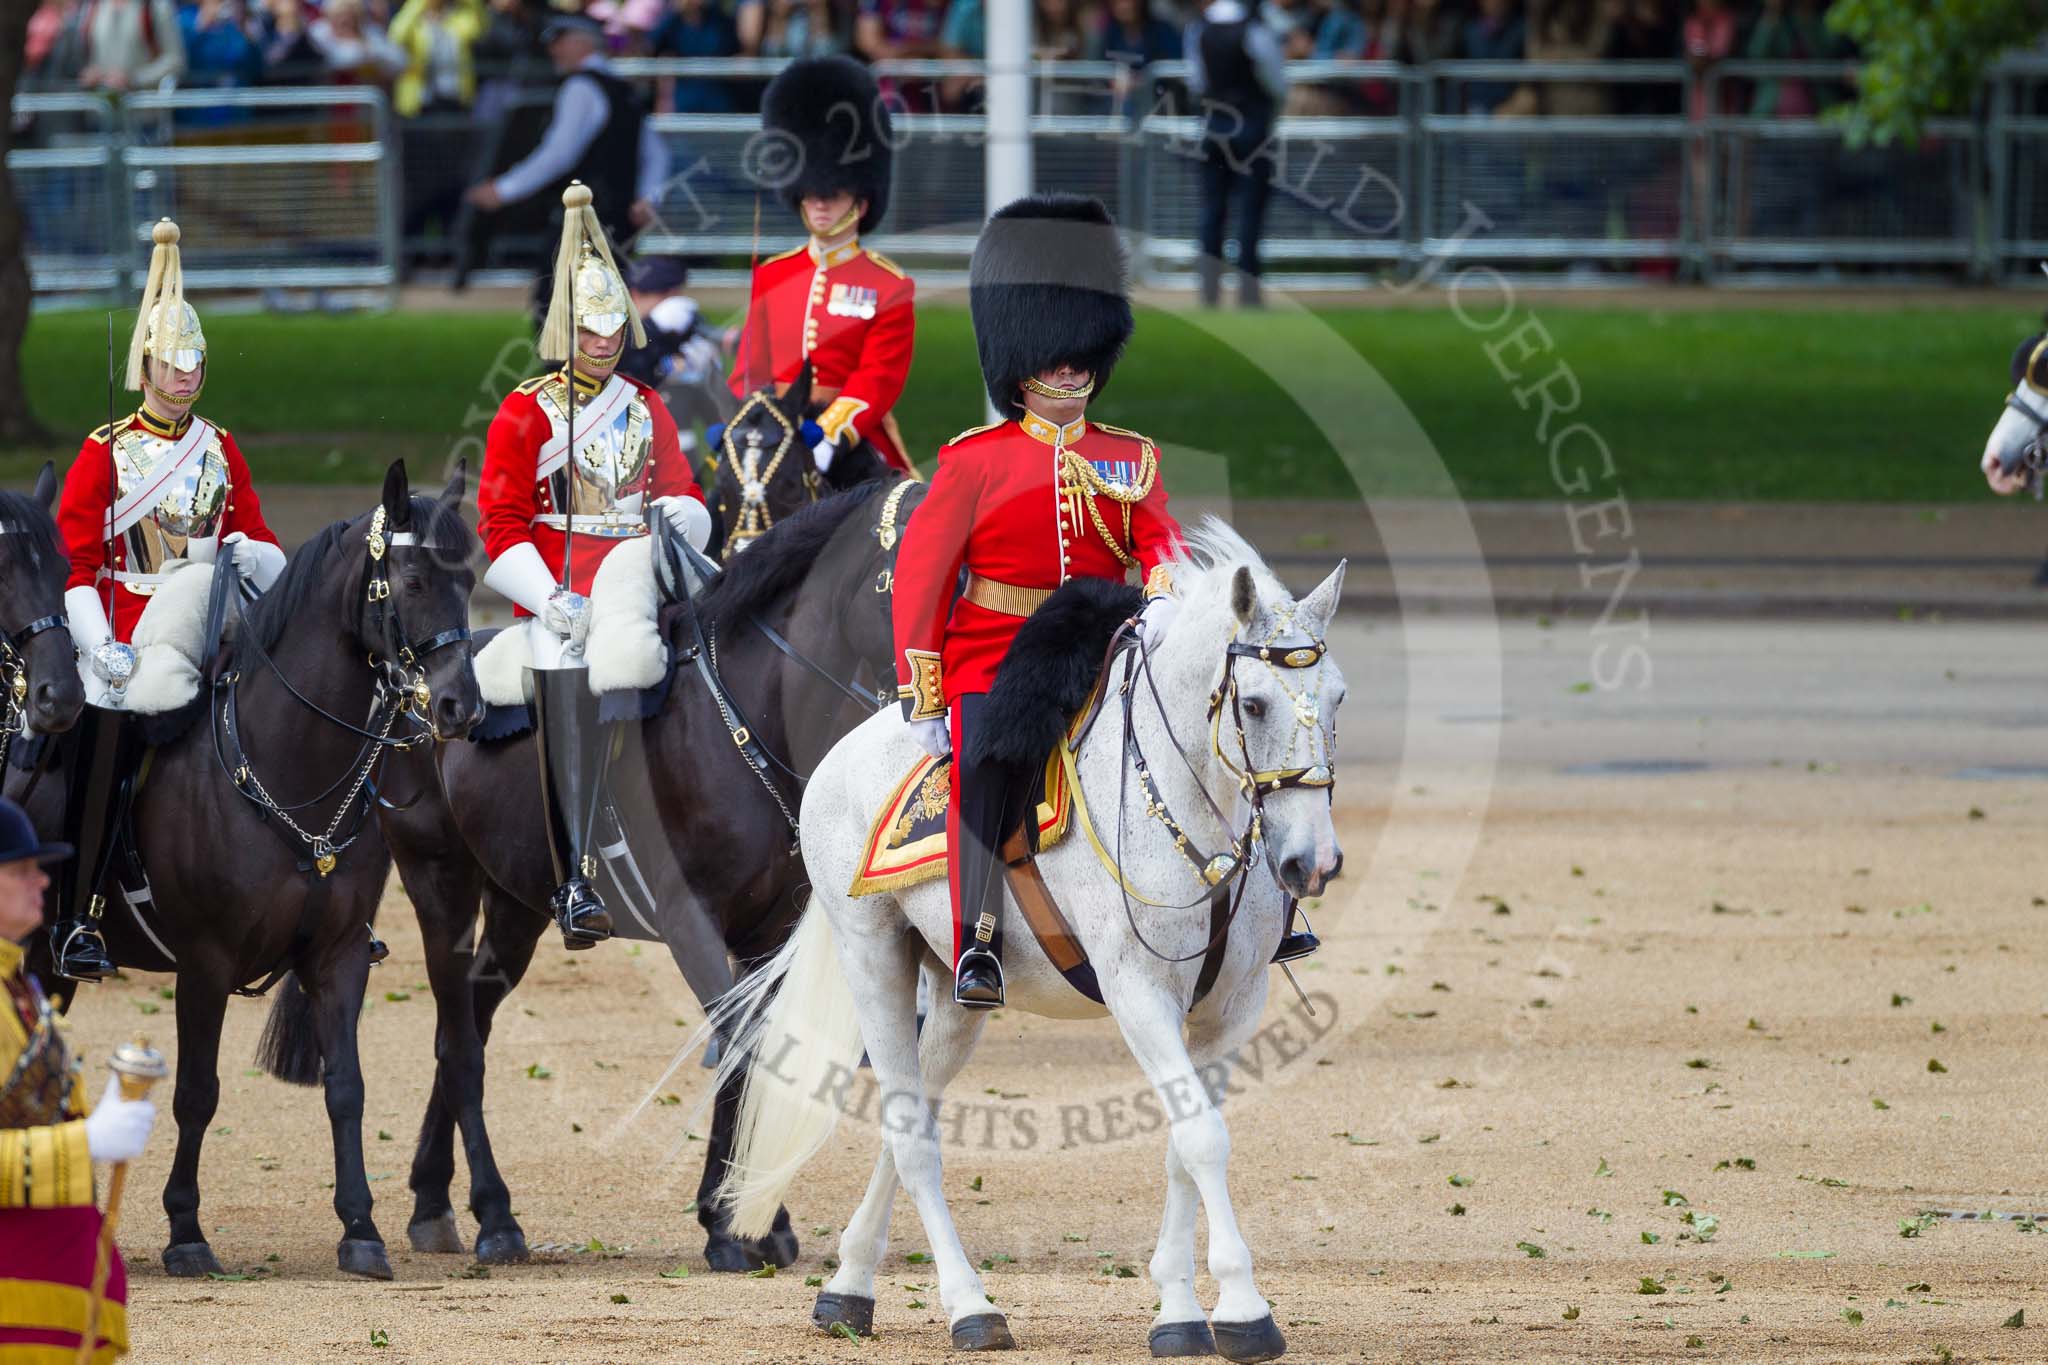 The Colonel's Review 2015.
Horse Guards Parade, Westminster,
London,

United Kingdom,
on 06 June 2015 at 11:04, image #223